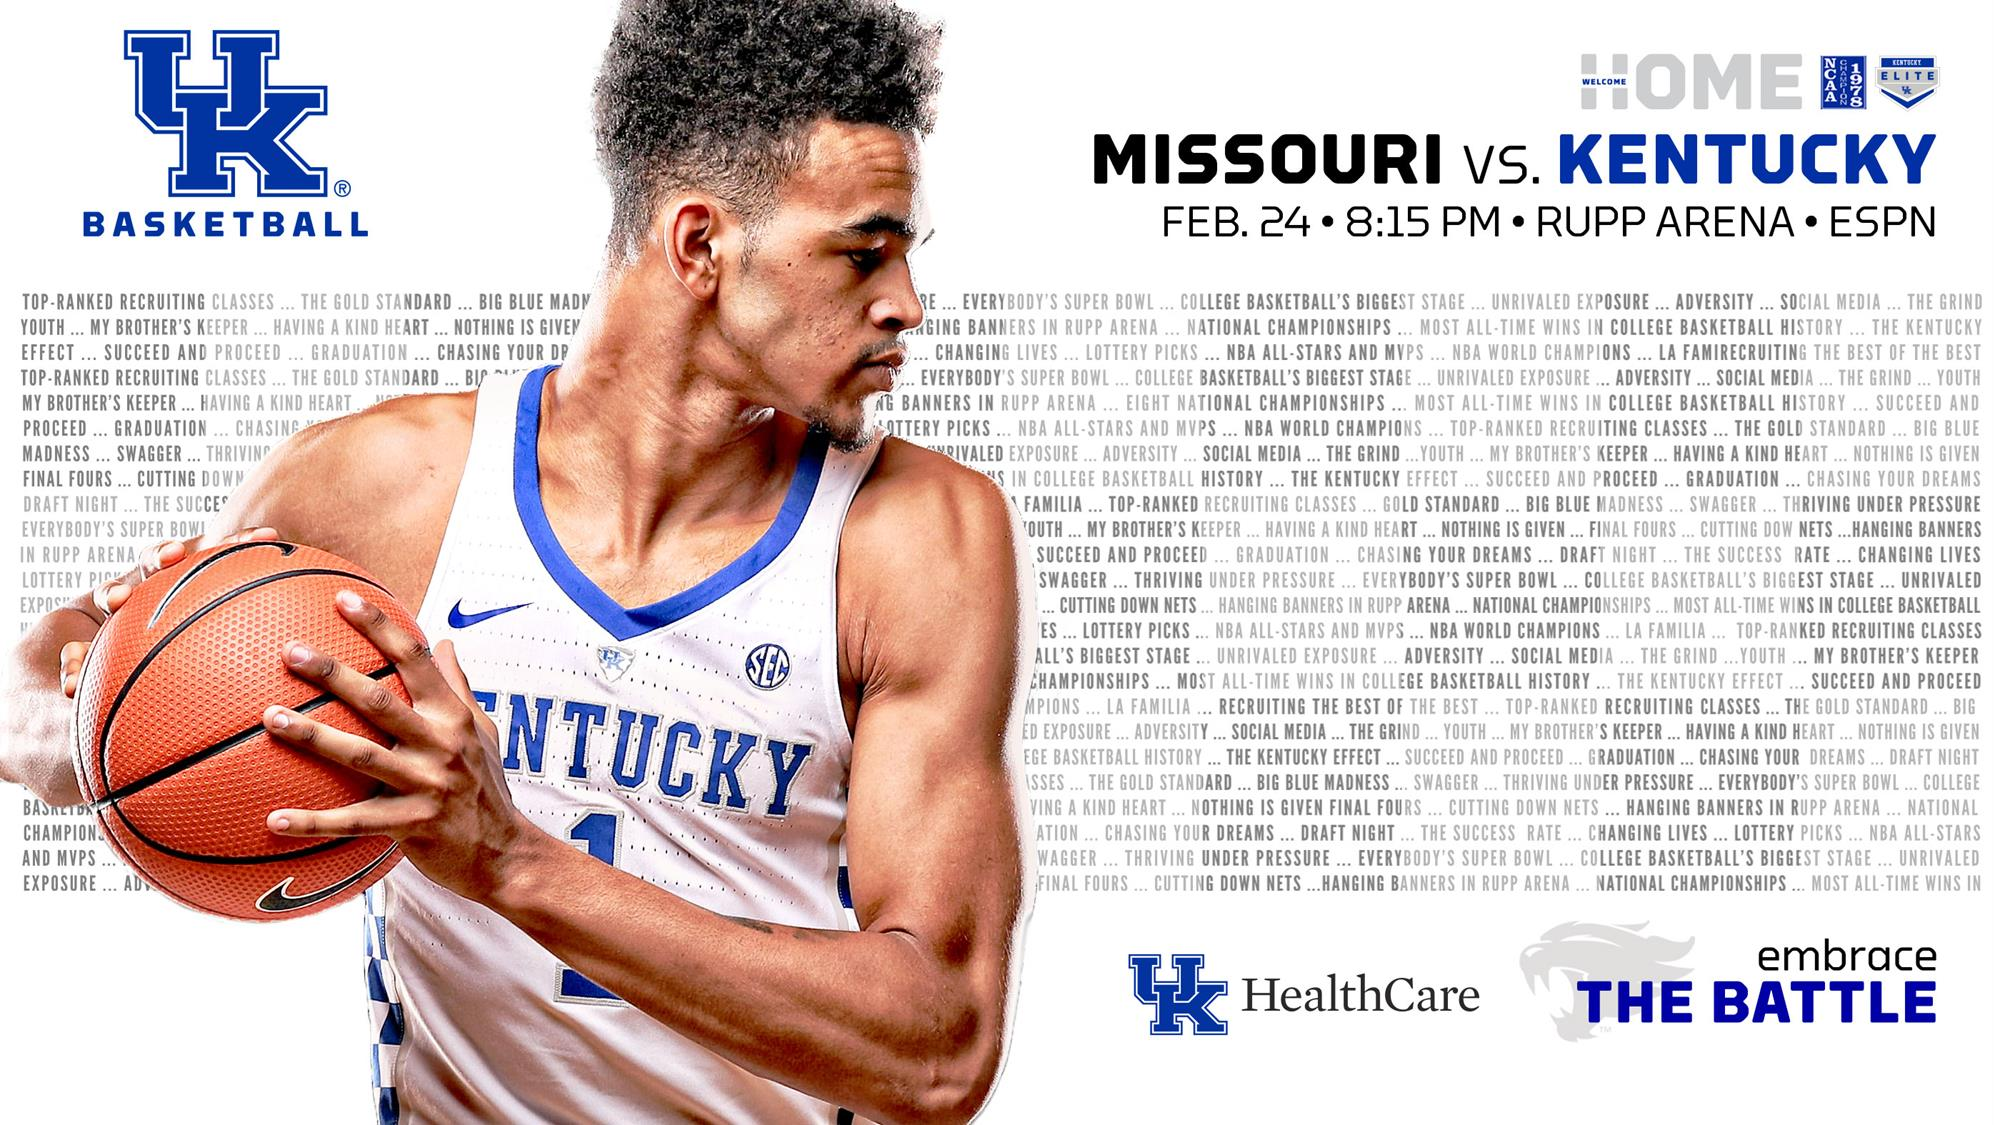 Better Late Than Never: UK Out to Continue Surge vs. Mizzou